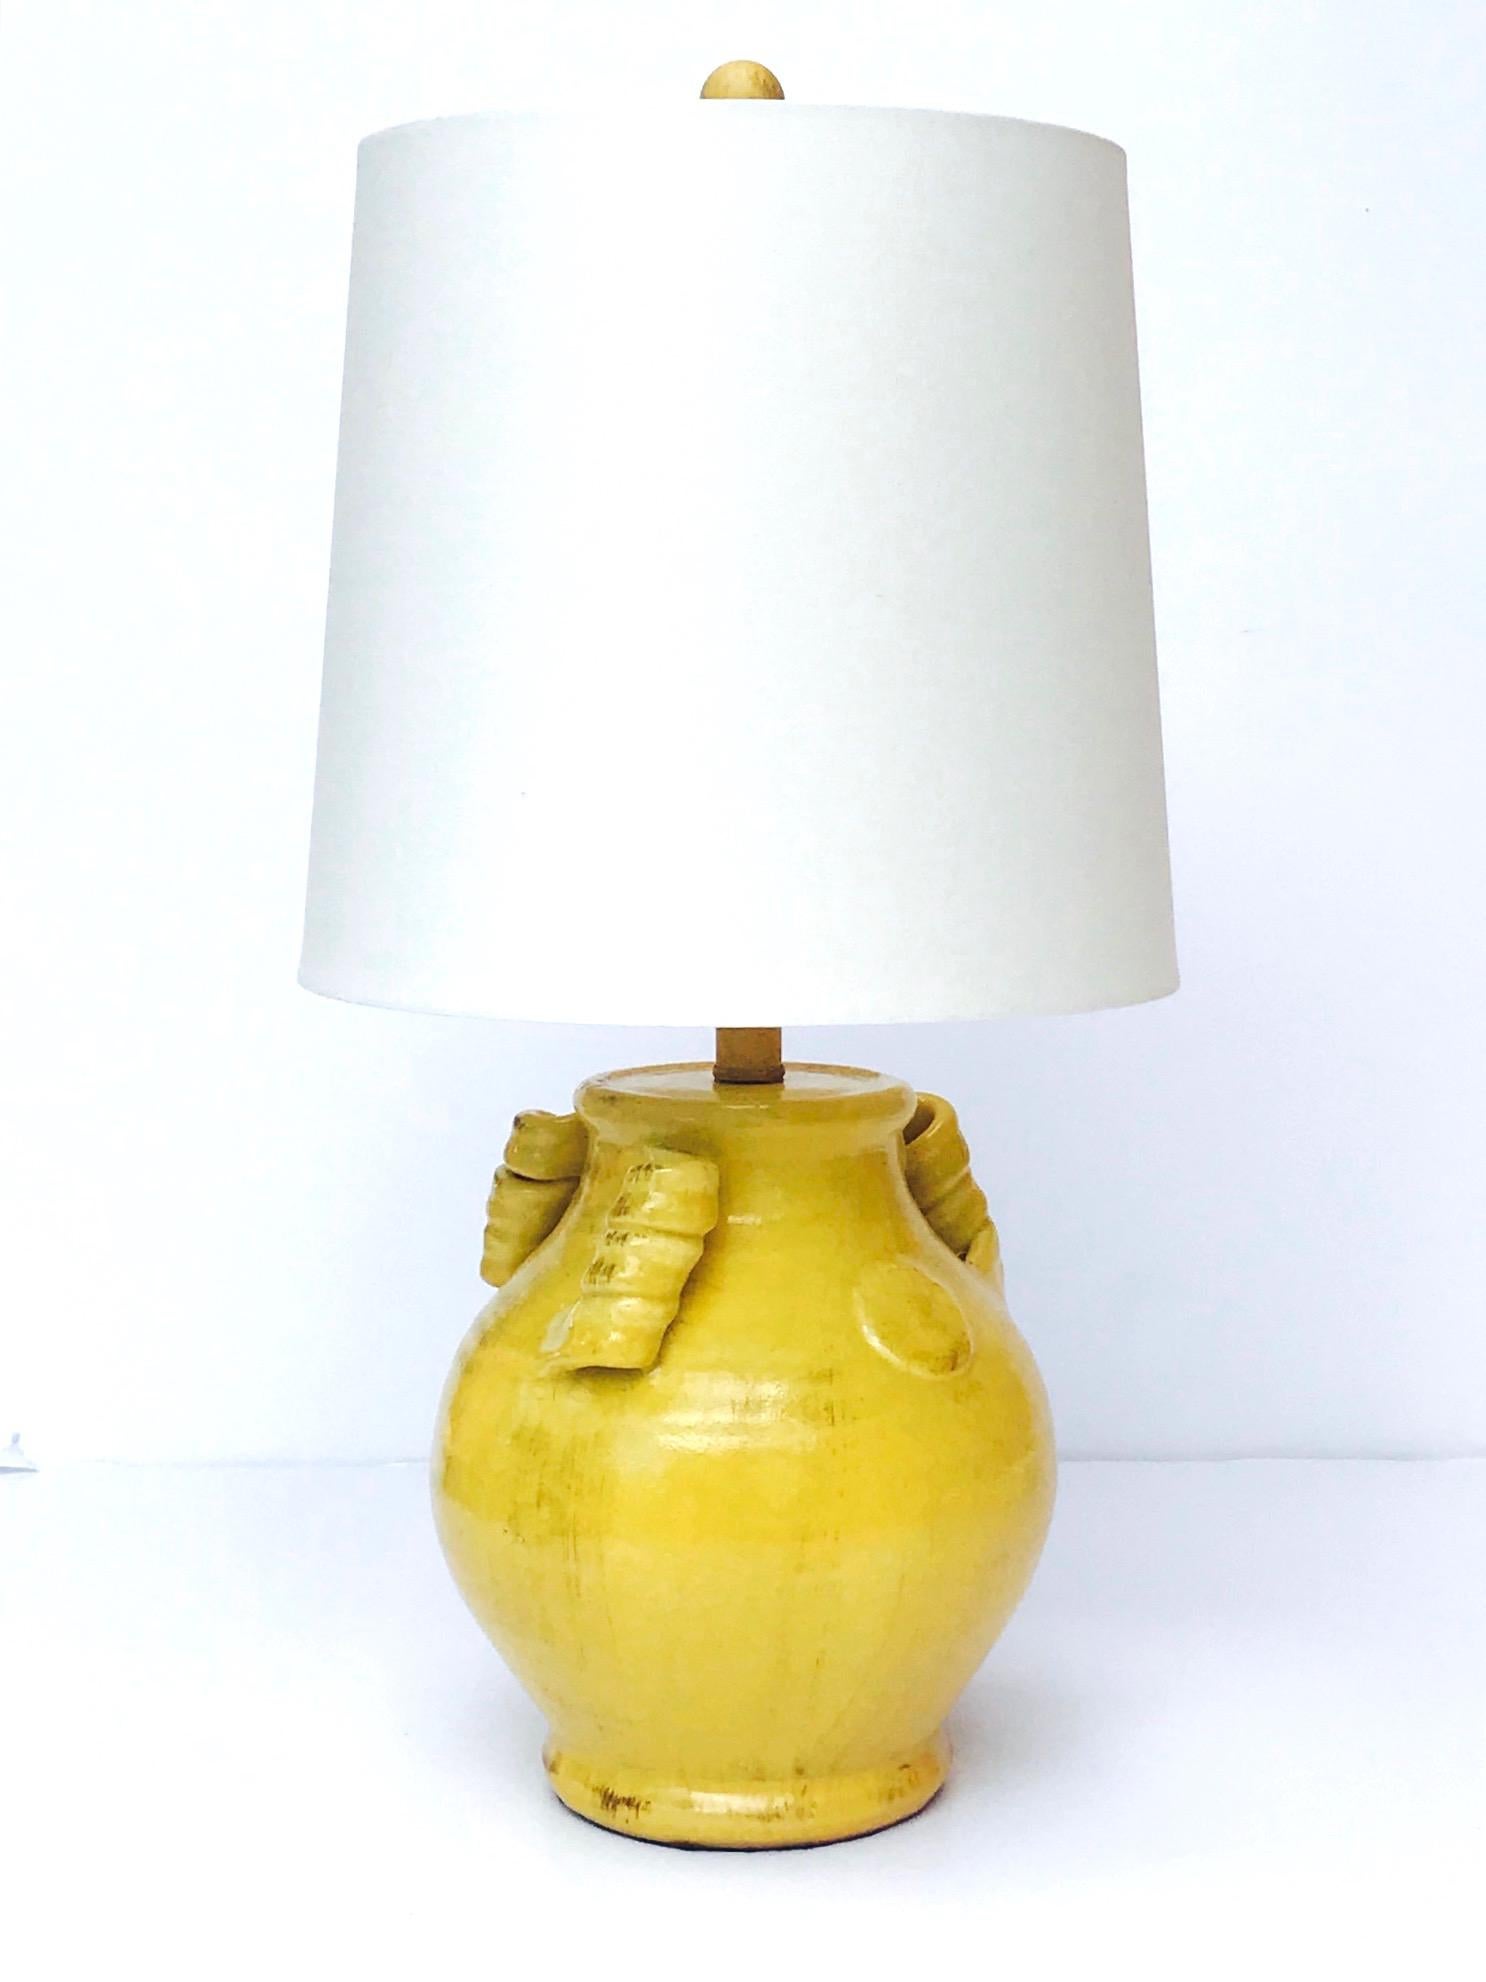 Chinoiserie Pair of Vintage Chinese Pottery Lamps with Antique Yellow Glaze, c. 1980's